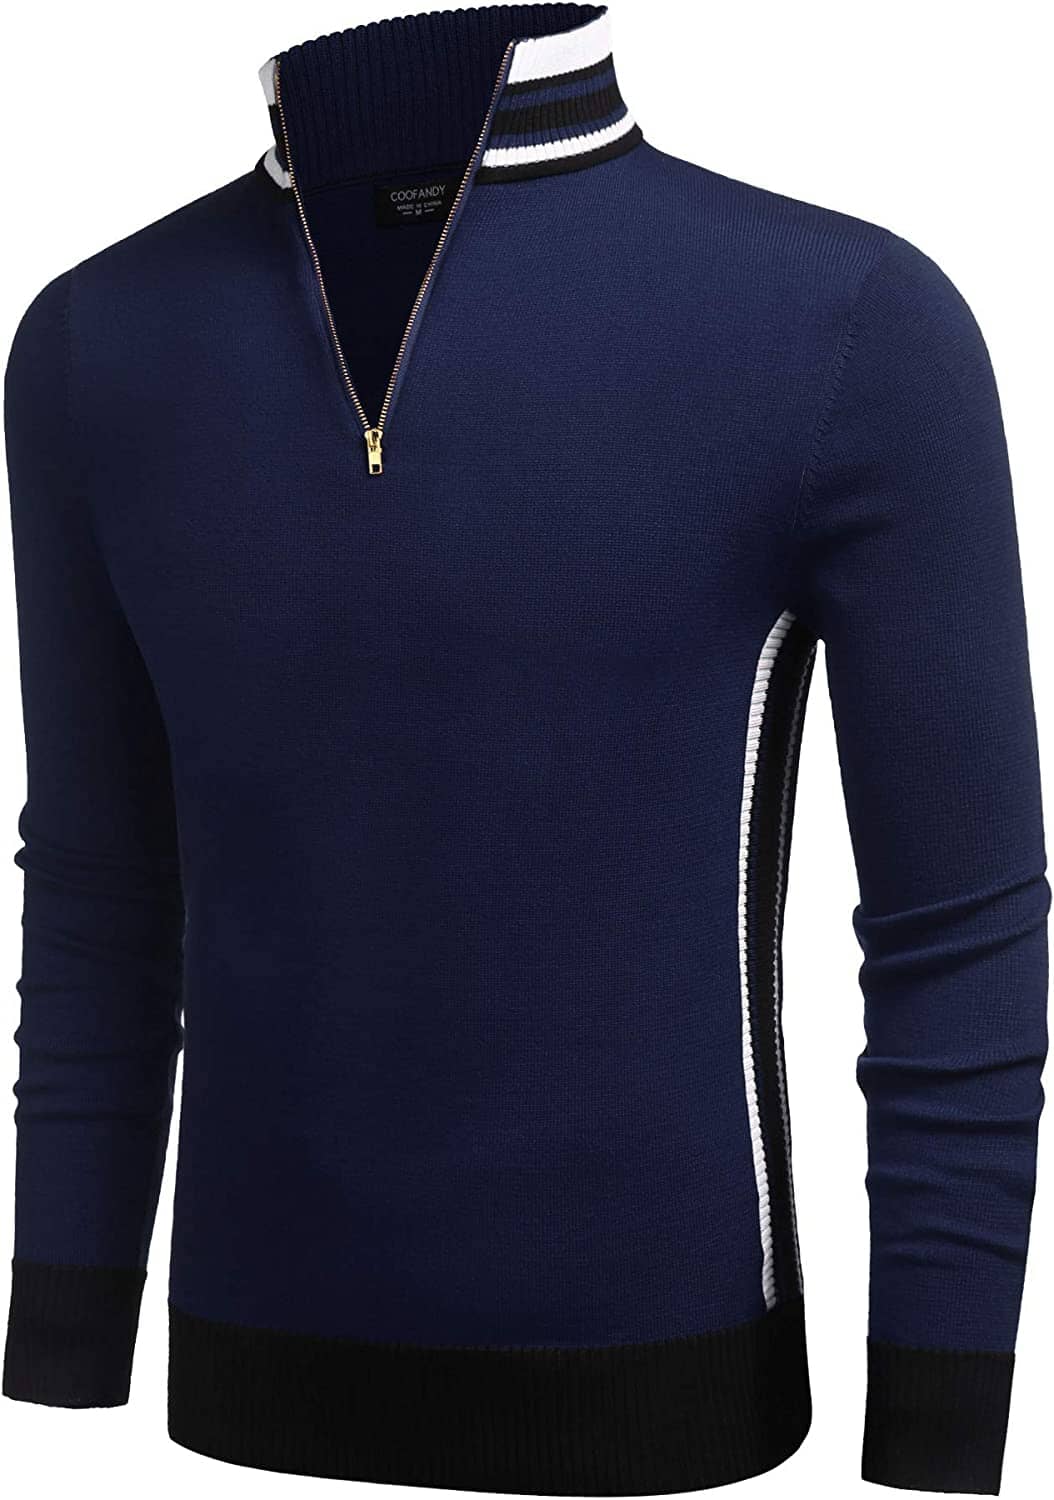 Striped Collar Pullover Sweater (US Only) Sweaters COOFANDY Store Navy Blue M 